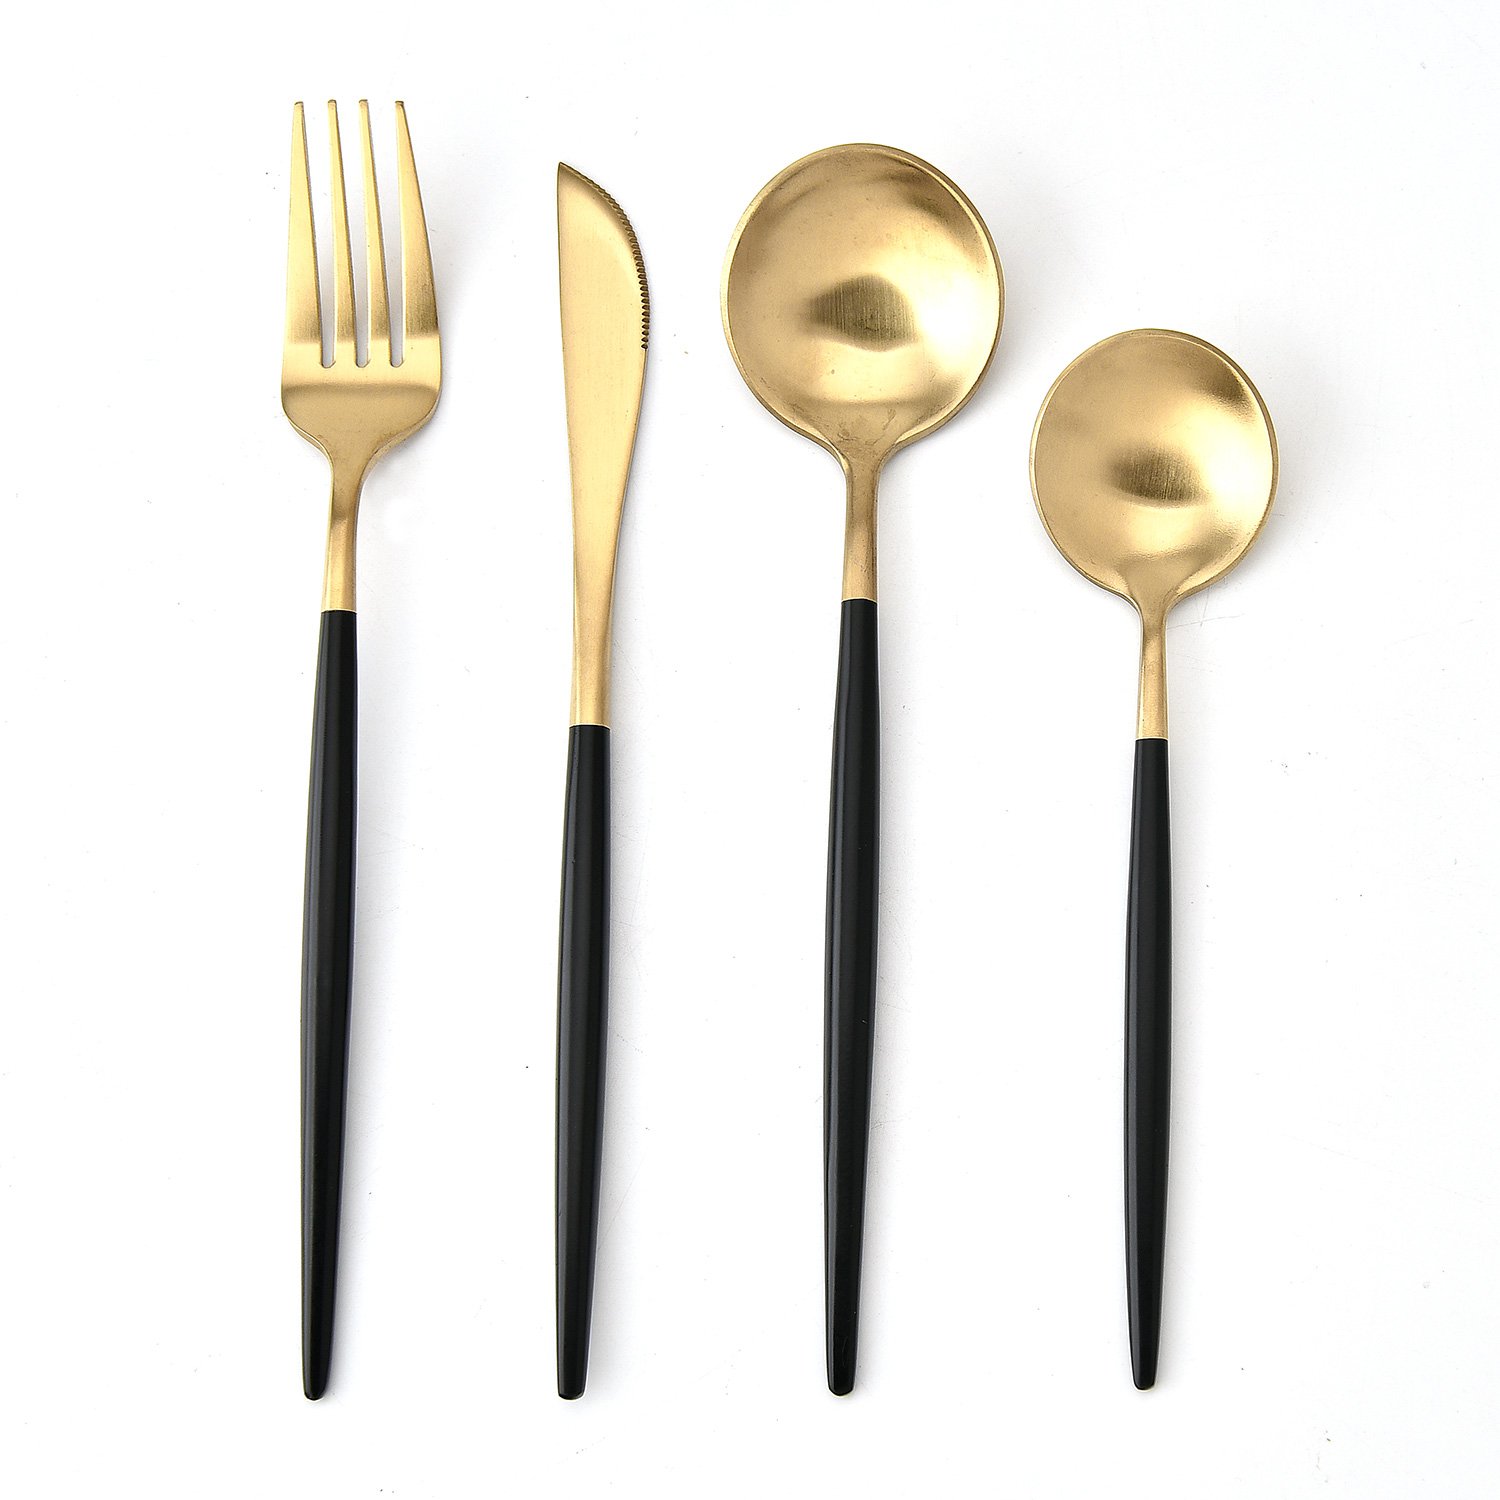 4-Piece Cutlery Set - Gold fork, knife and spoon with black handle BH7213